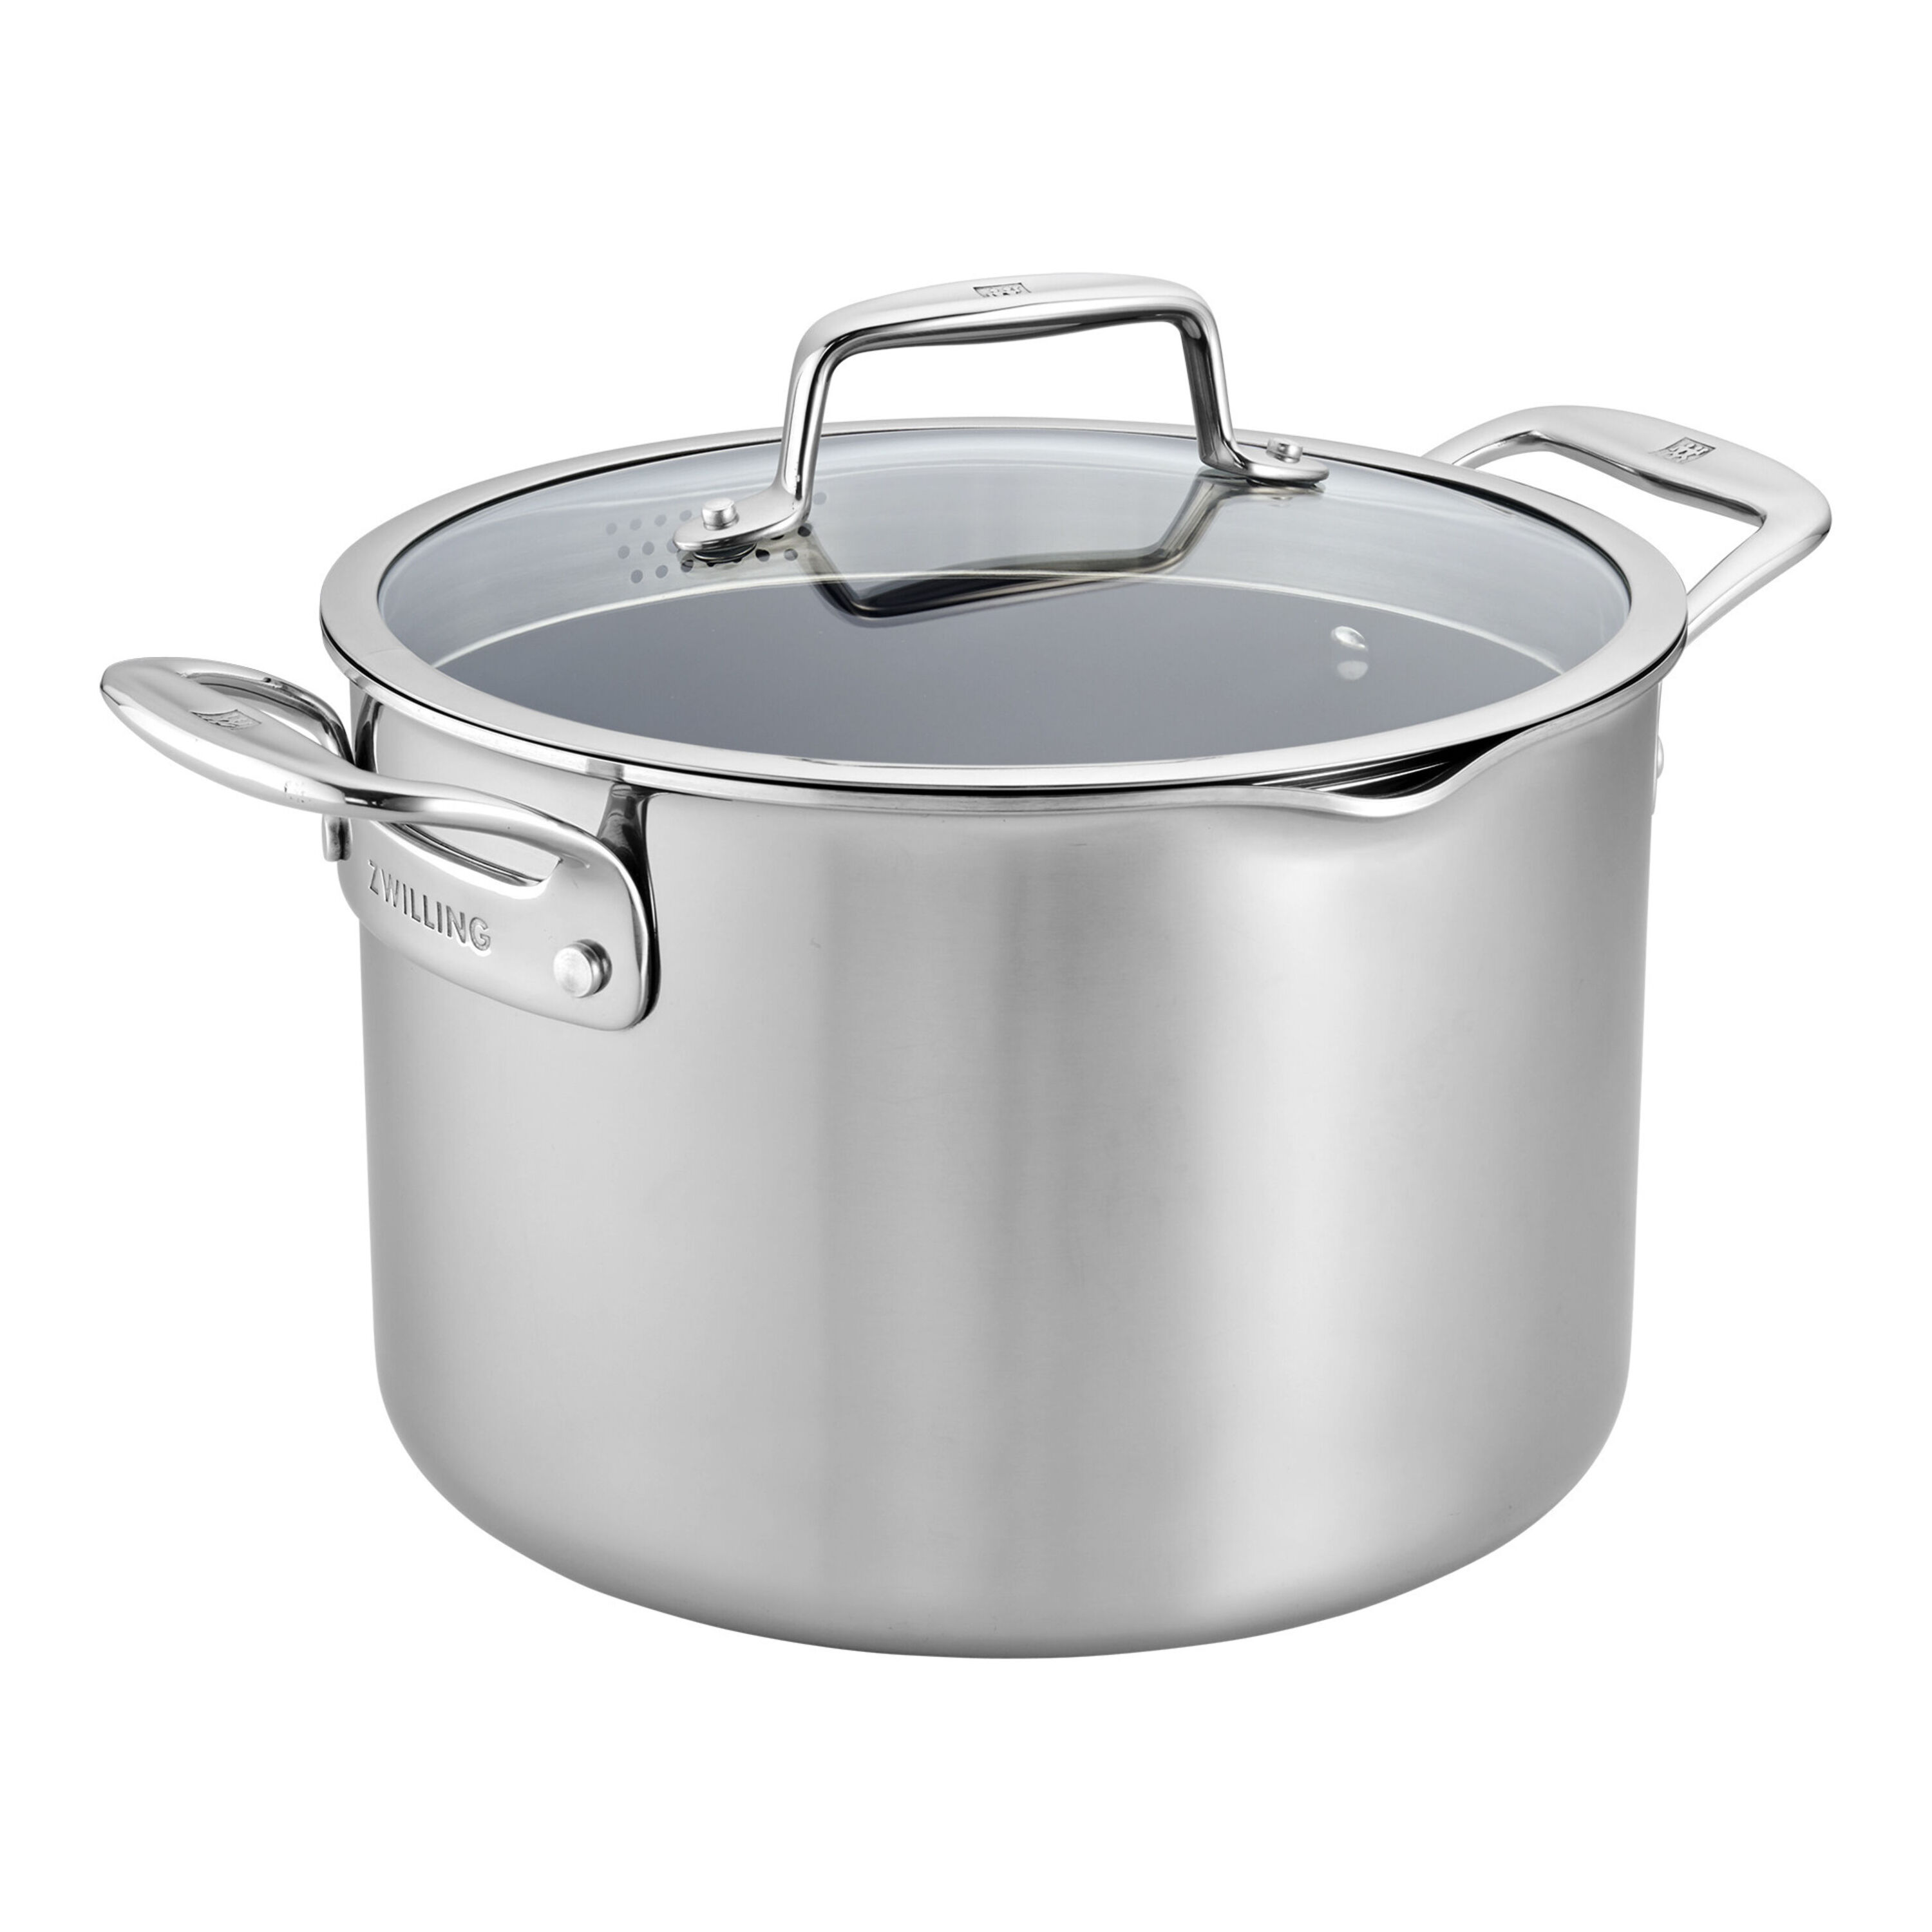 All-Clad Nonstick Stockpot with Straining Lid, 6 Qt.